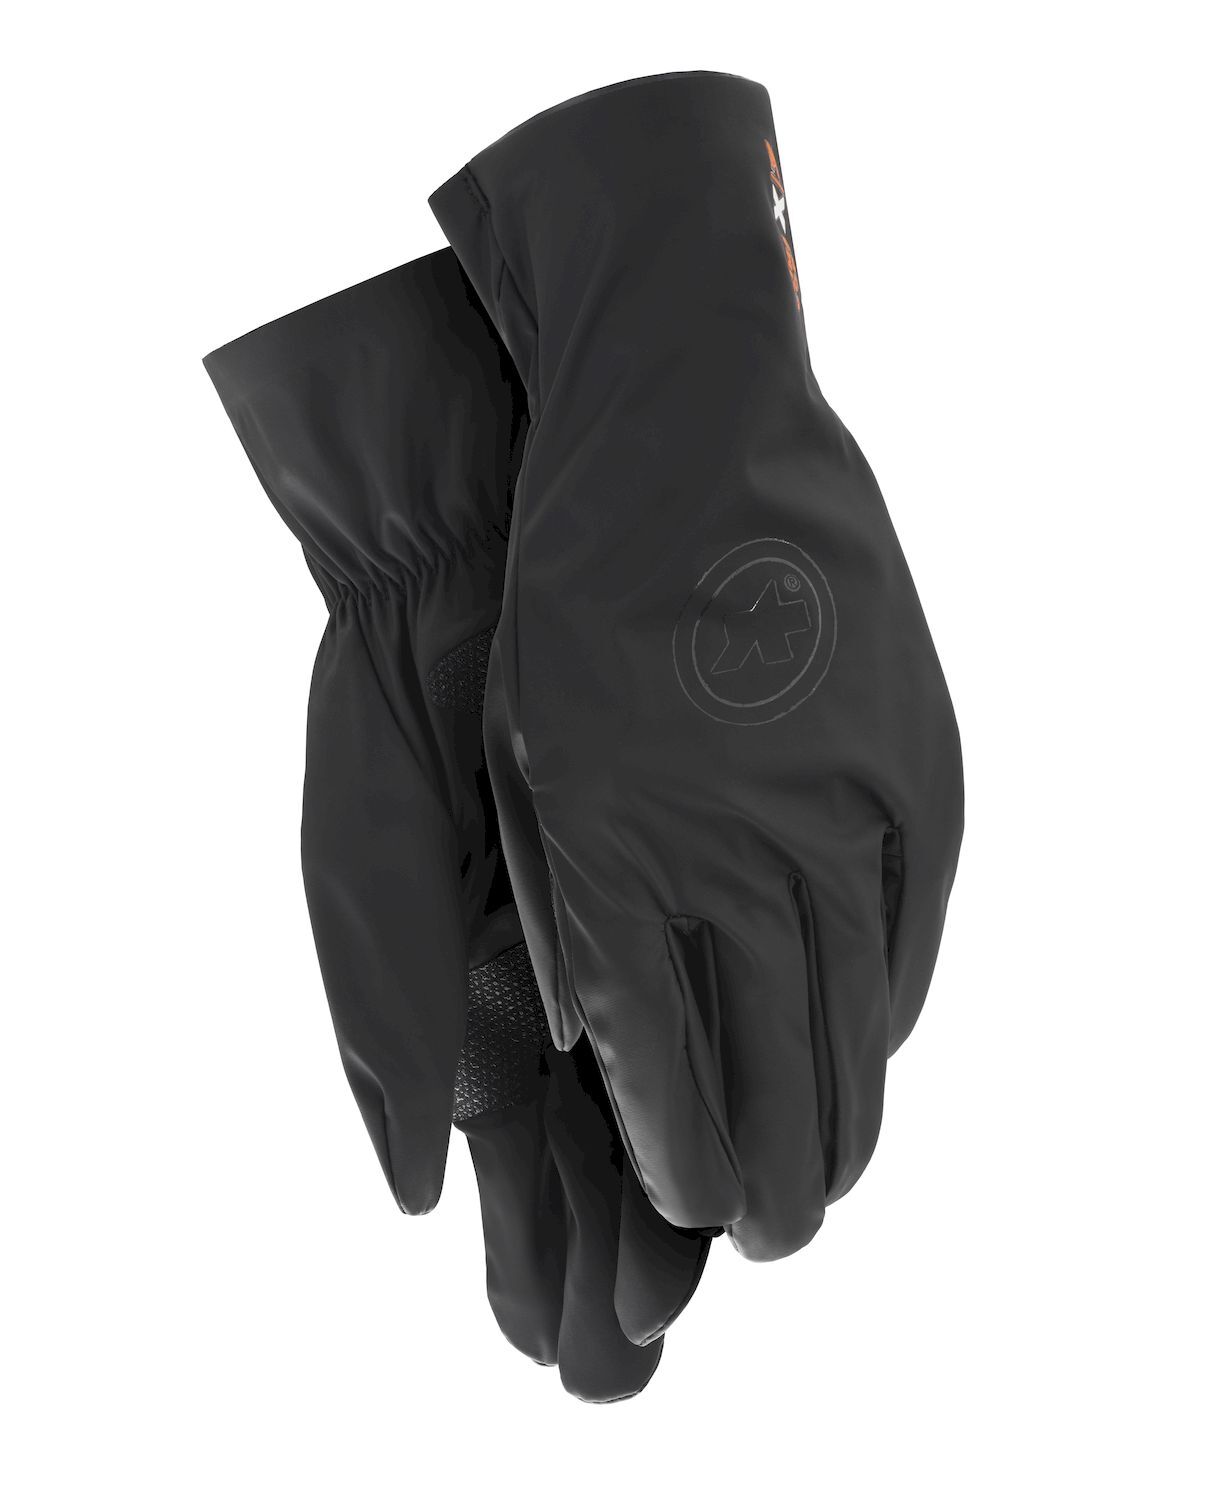 Assos RSR Thermo Rain Shell Gloves - Cycling gloves